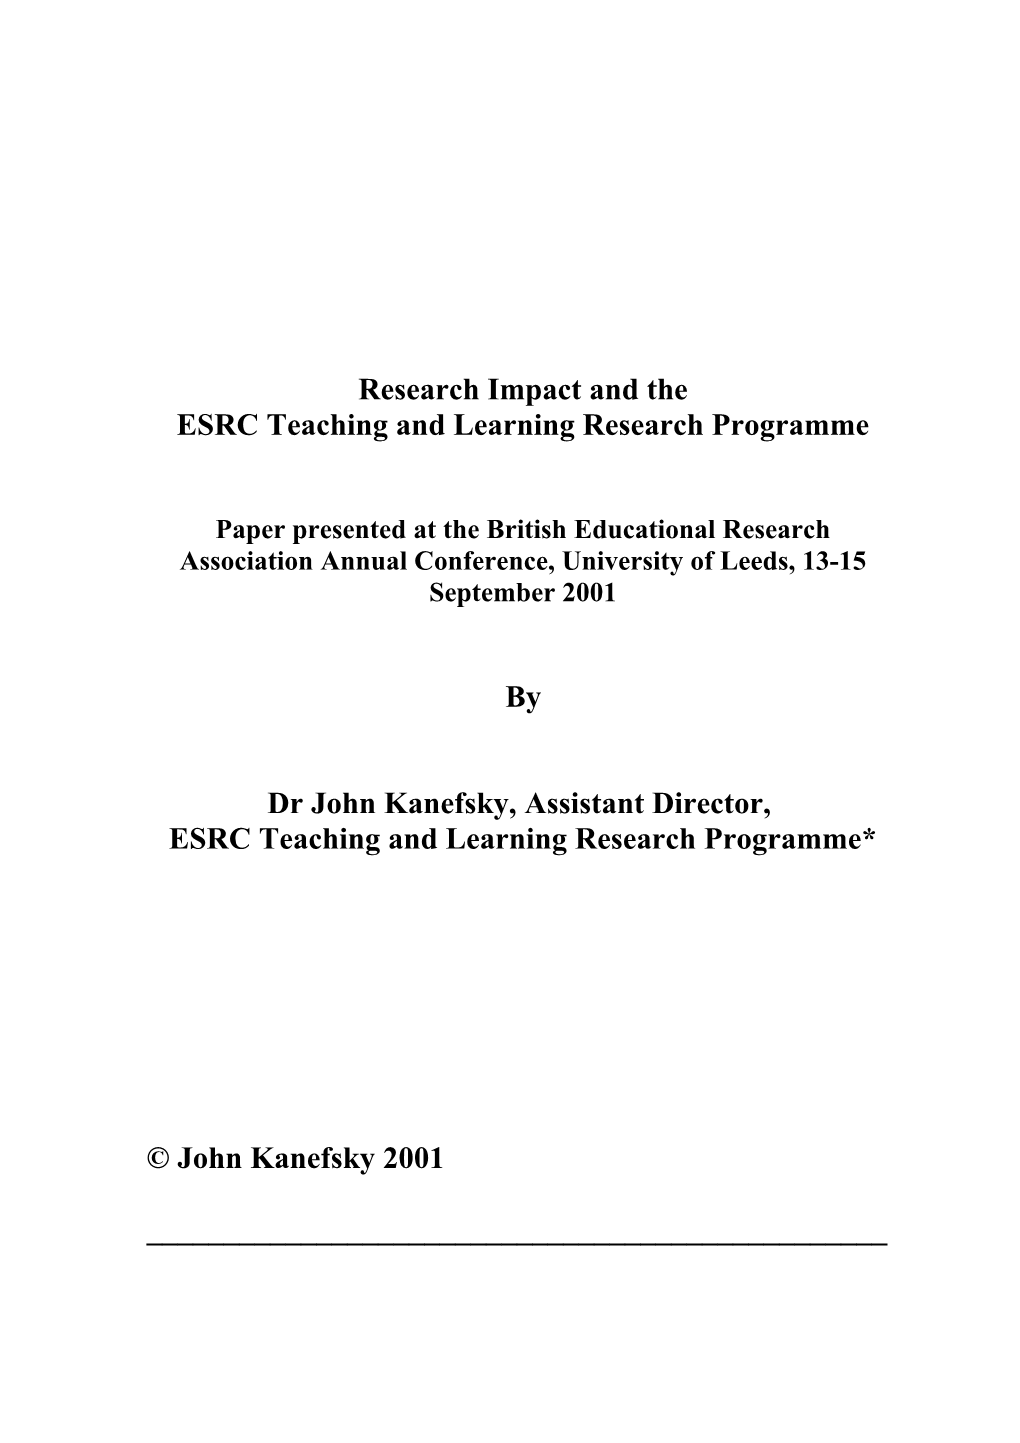 The ESRC Teaching and Learning Research Programme Is Committed to Maximising the Impact